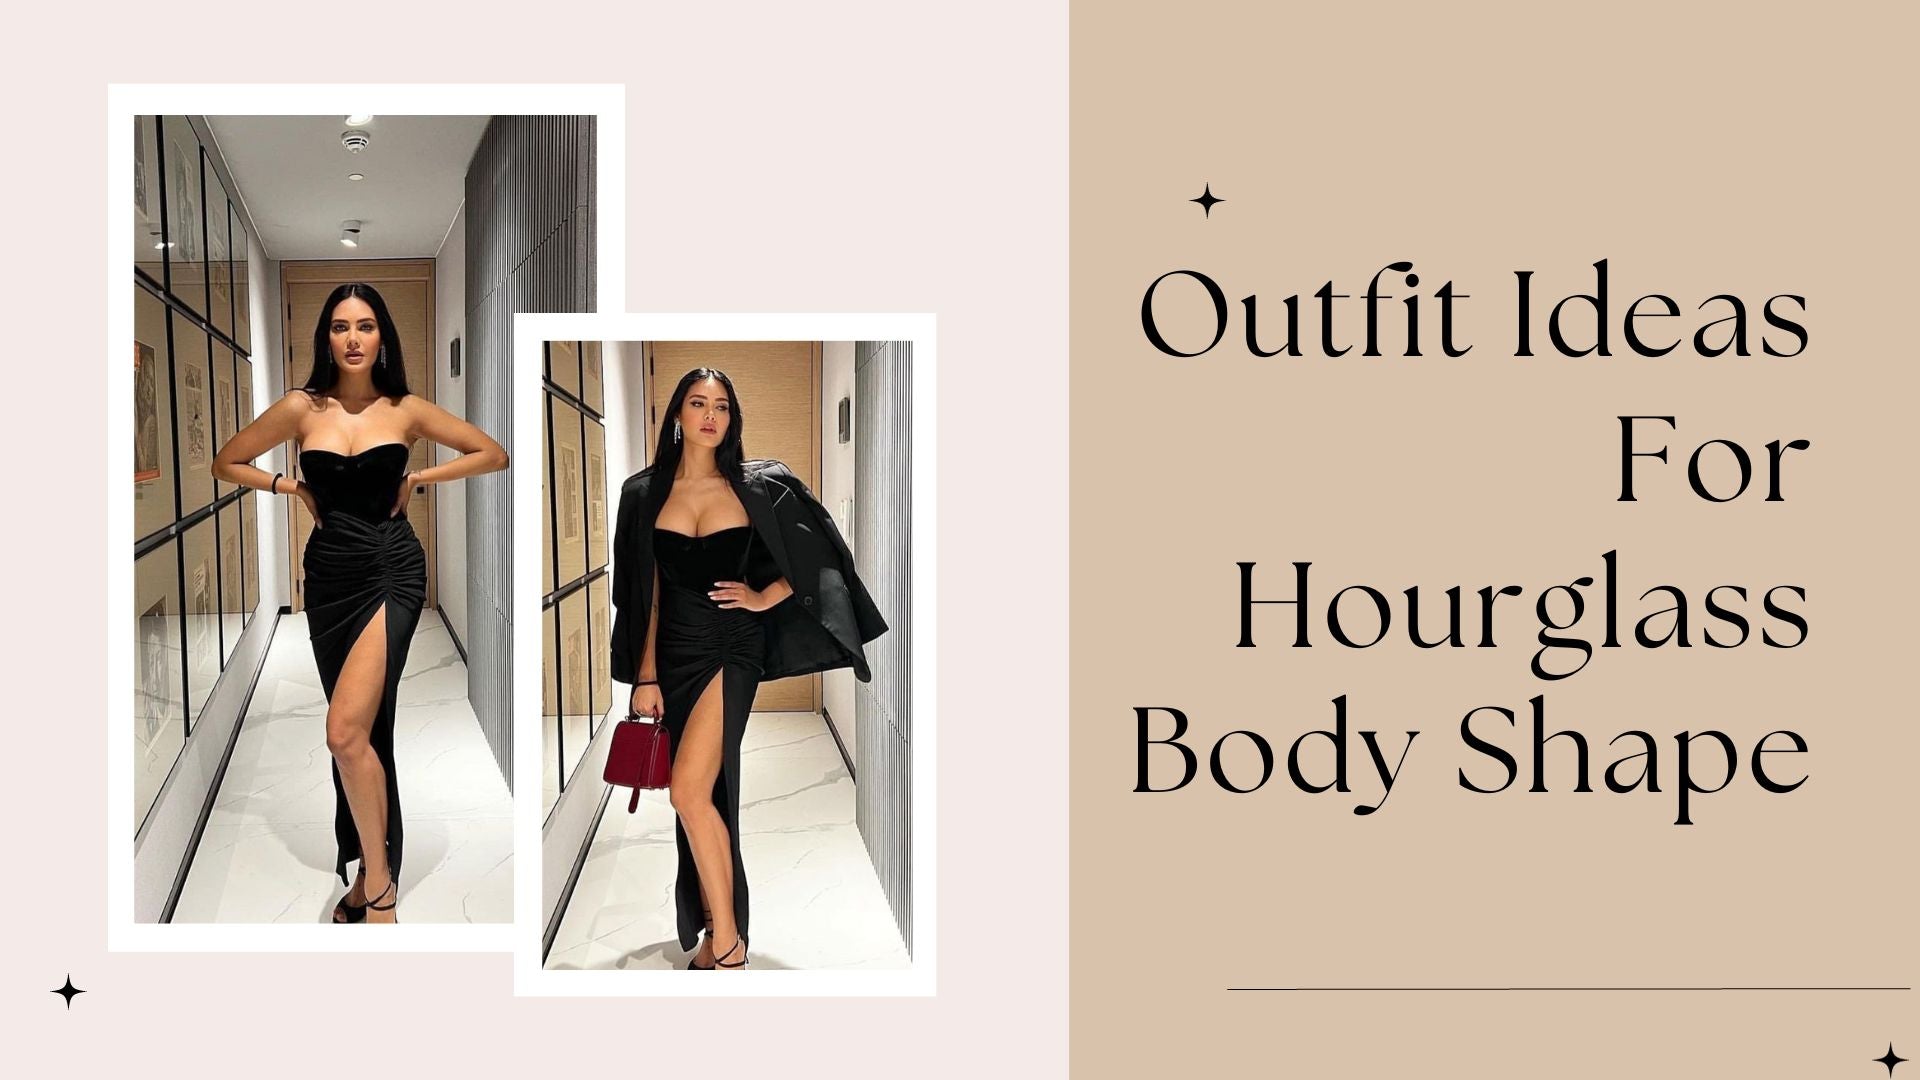 How To Get Hourglass Figure - Guide To Get Hourglass Body Shape